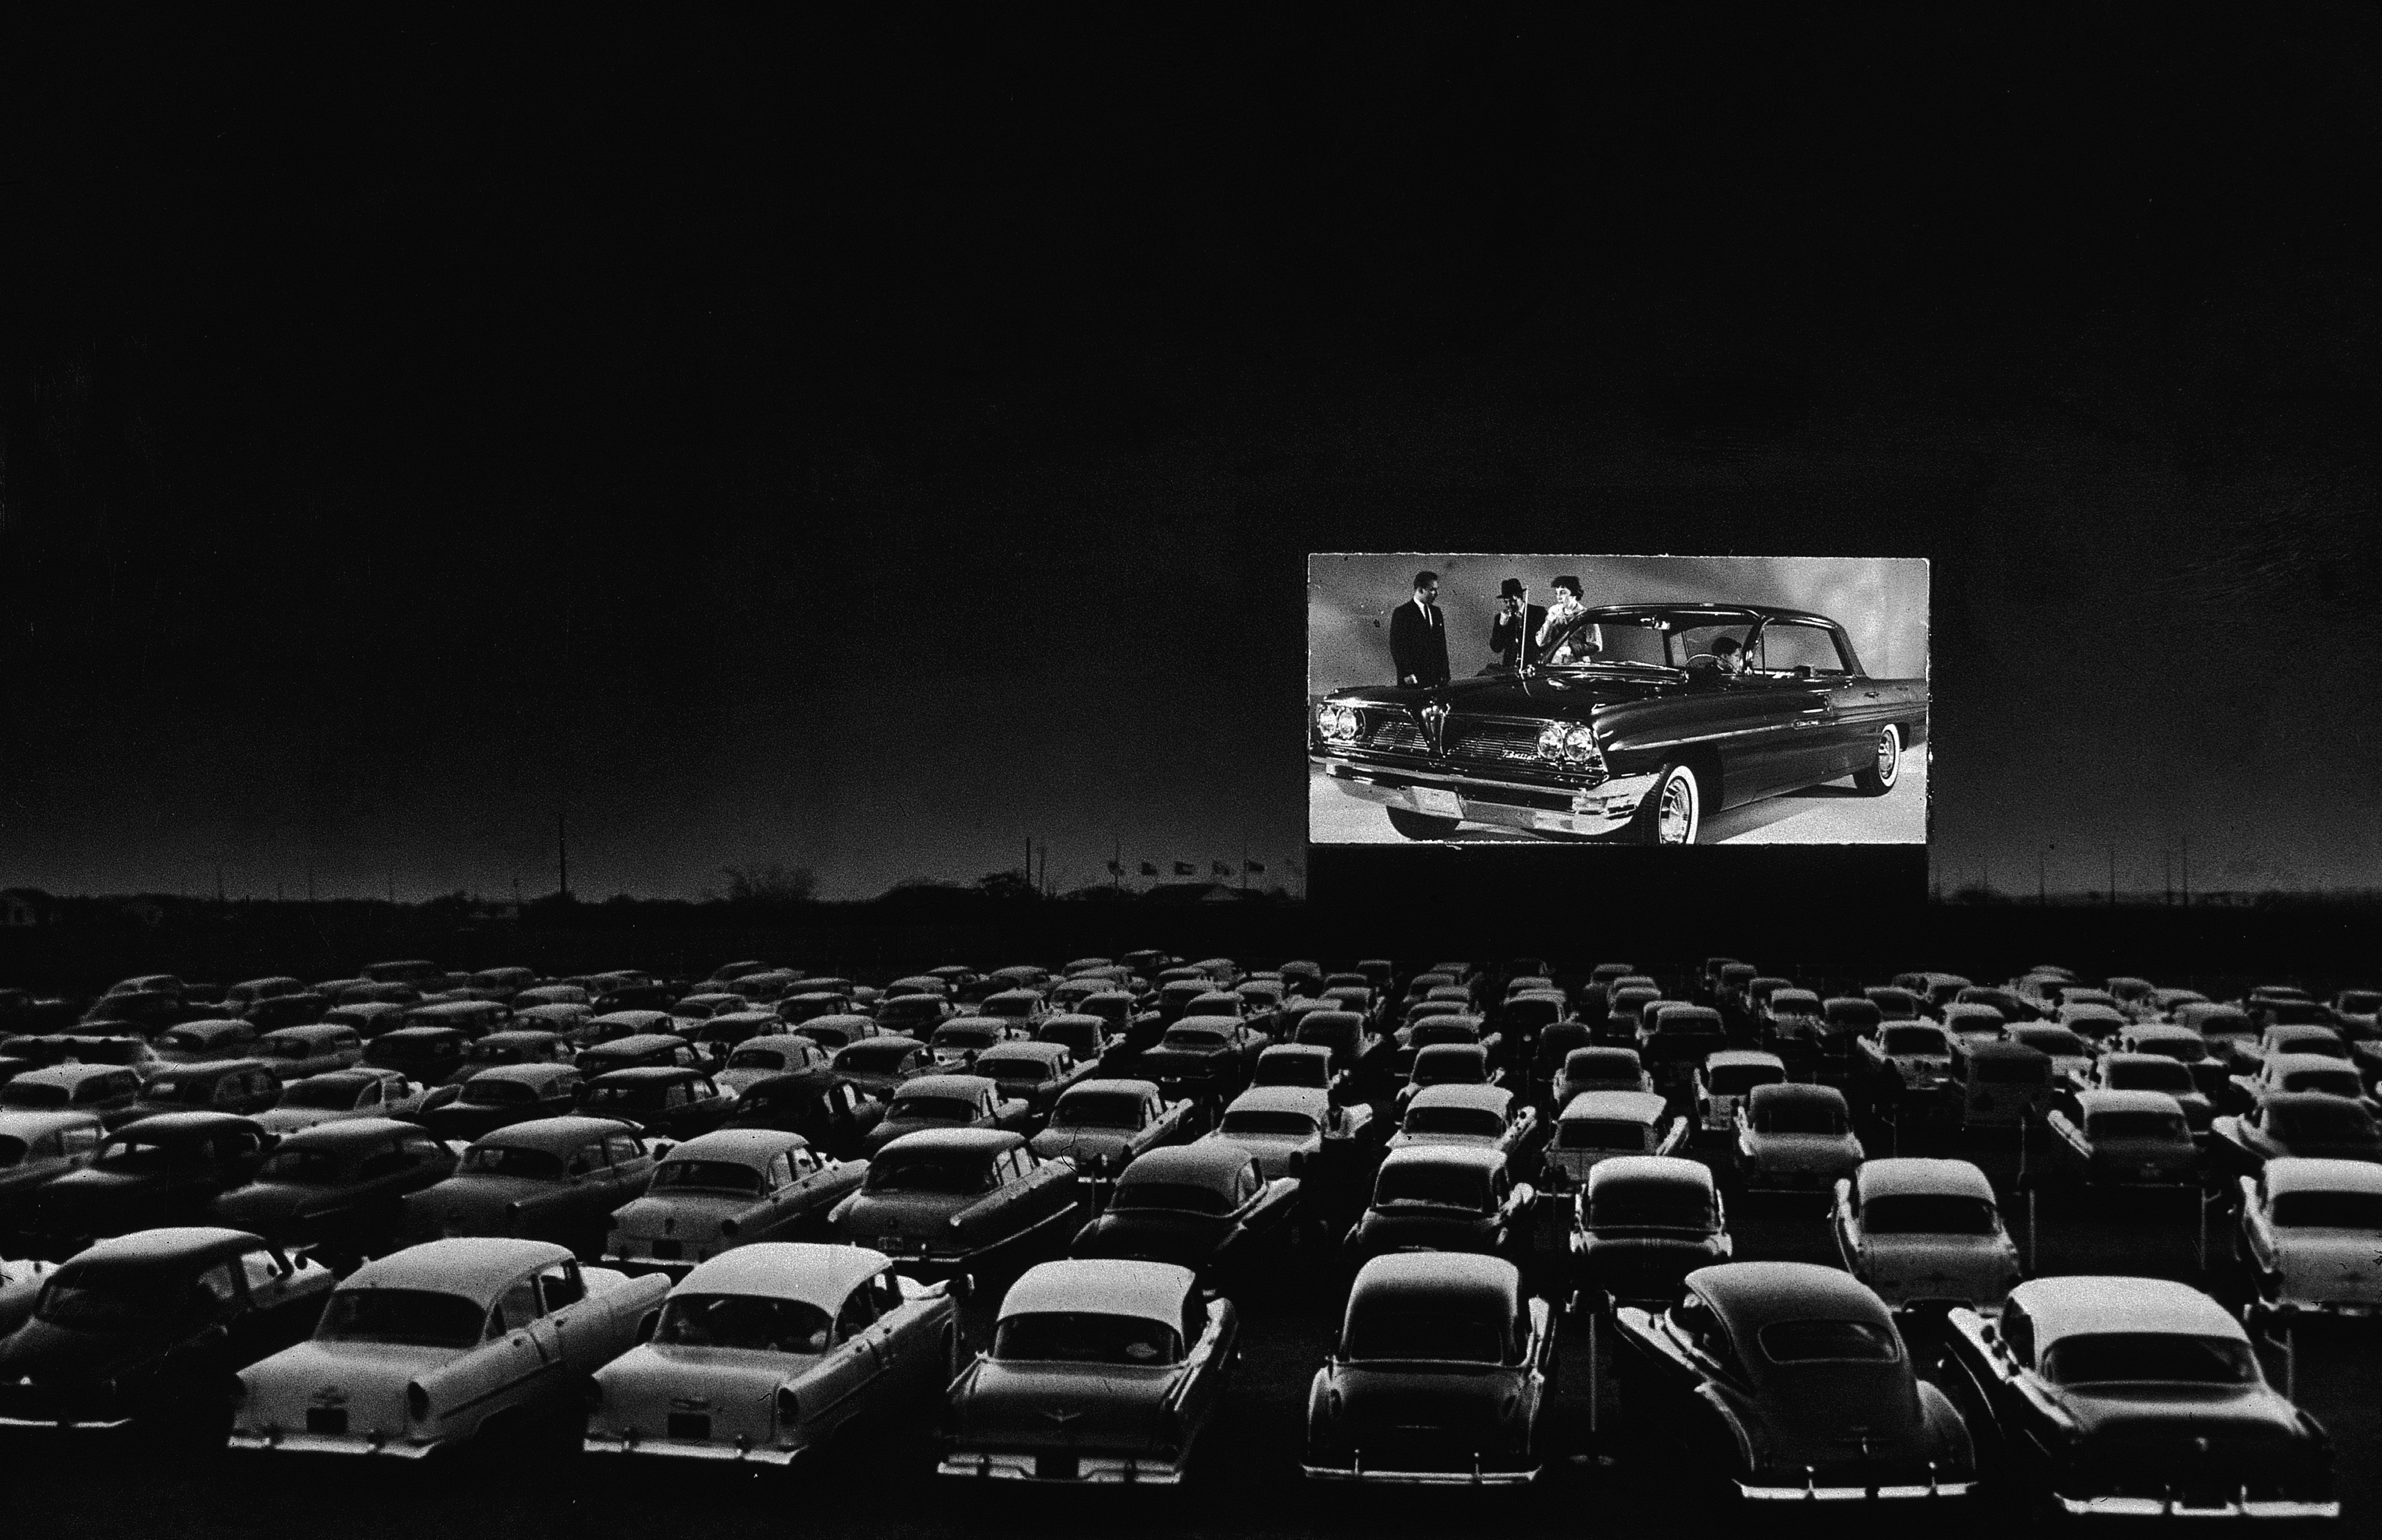 Rows of cars line up to watch a drive-in movie